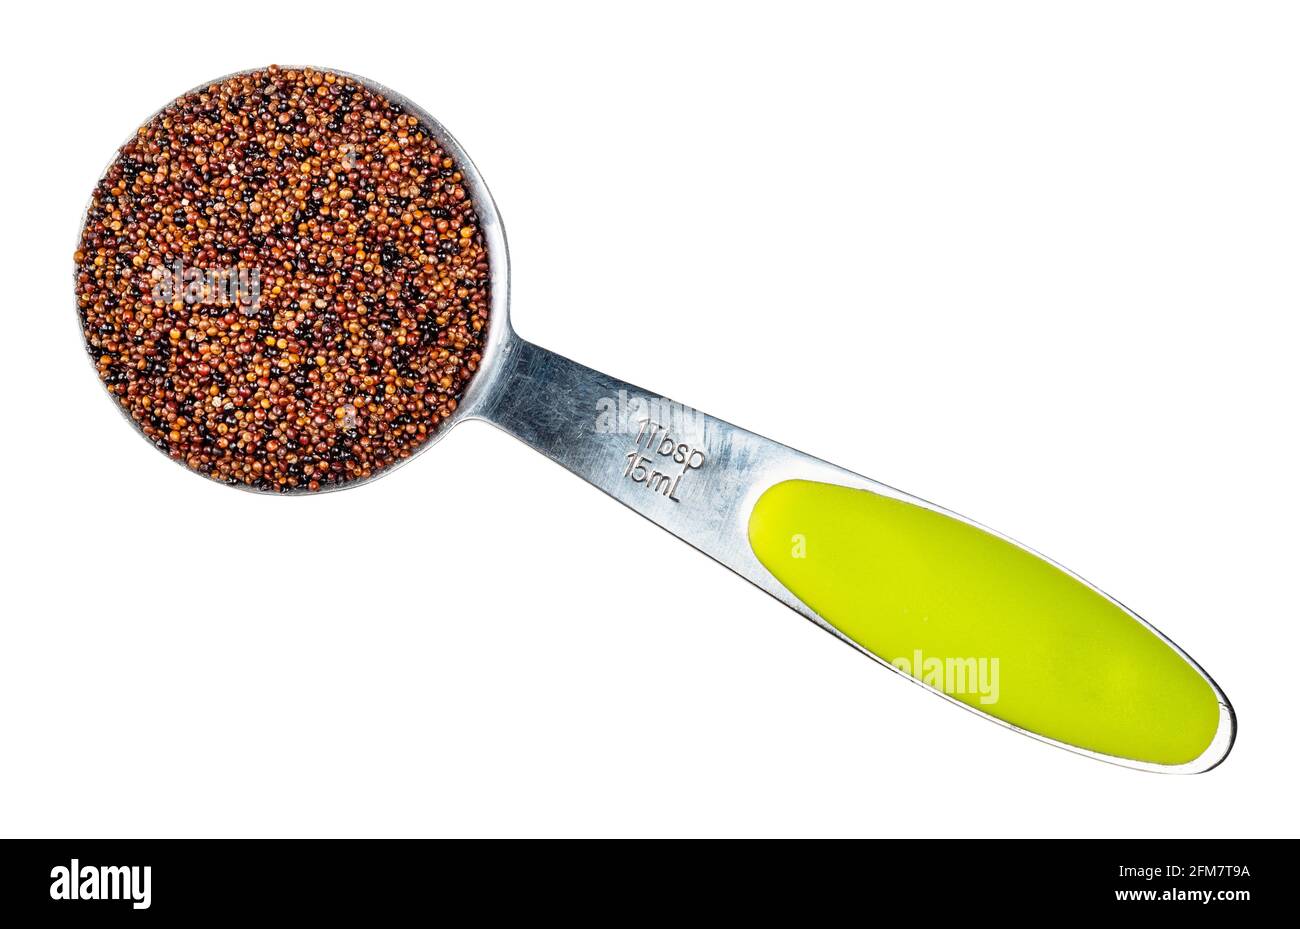 top view of canihua seeds in measuring spoon cutout on white background Stock Photo